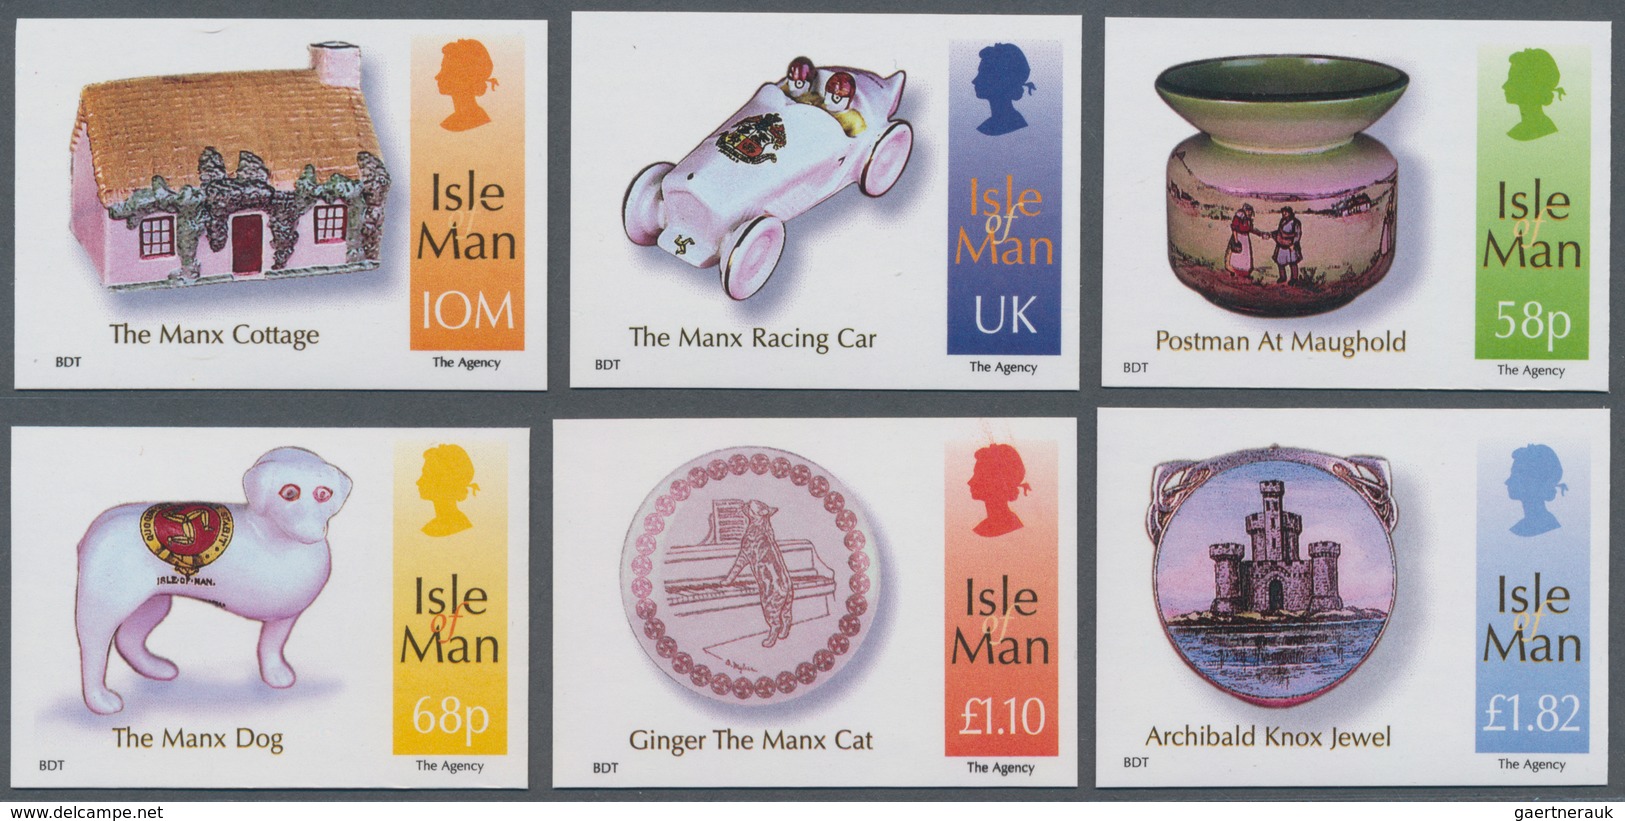 Großbritannien - Isle Of Man: 2012. Complete Set (6 Values) "The Kelly Collection Of Manx Memorabili - Man (Insel)